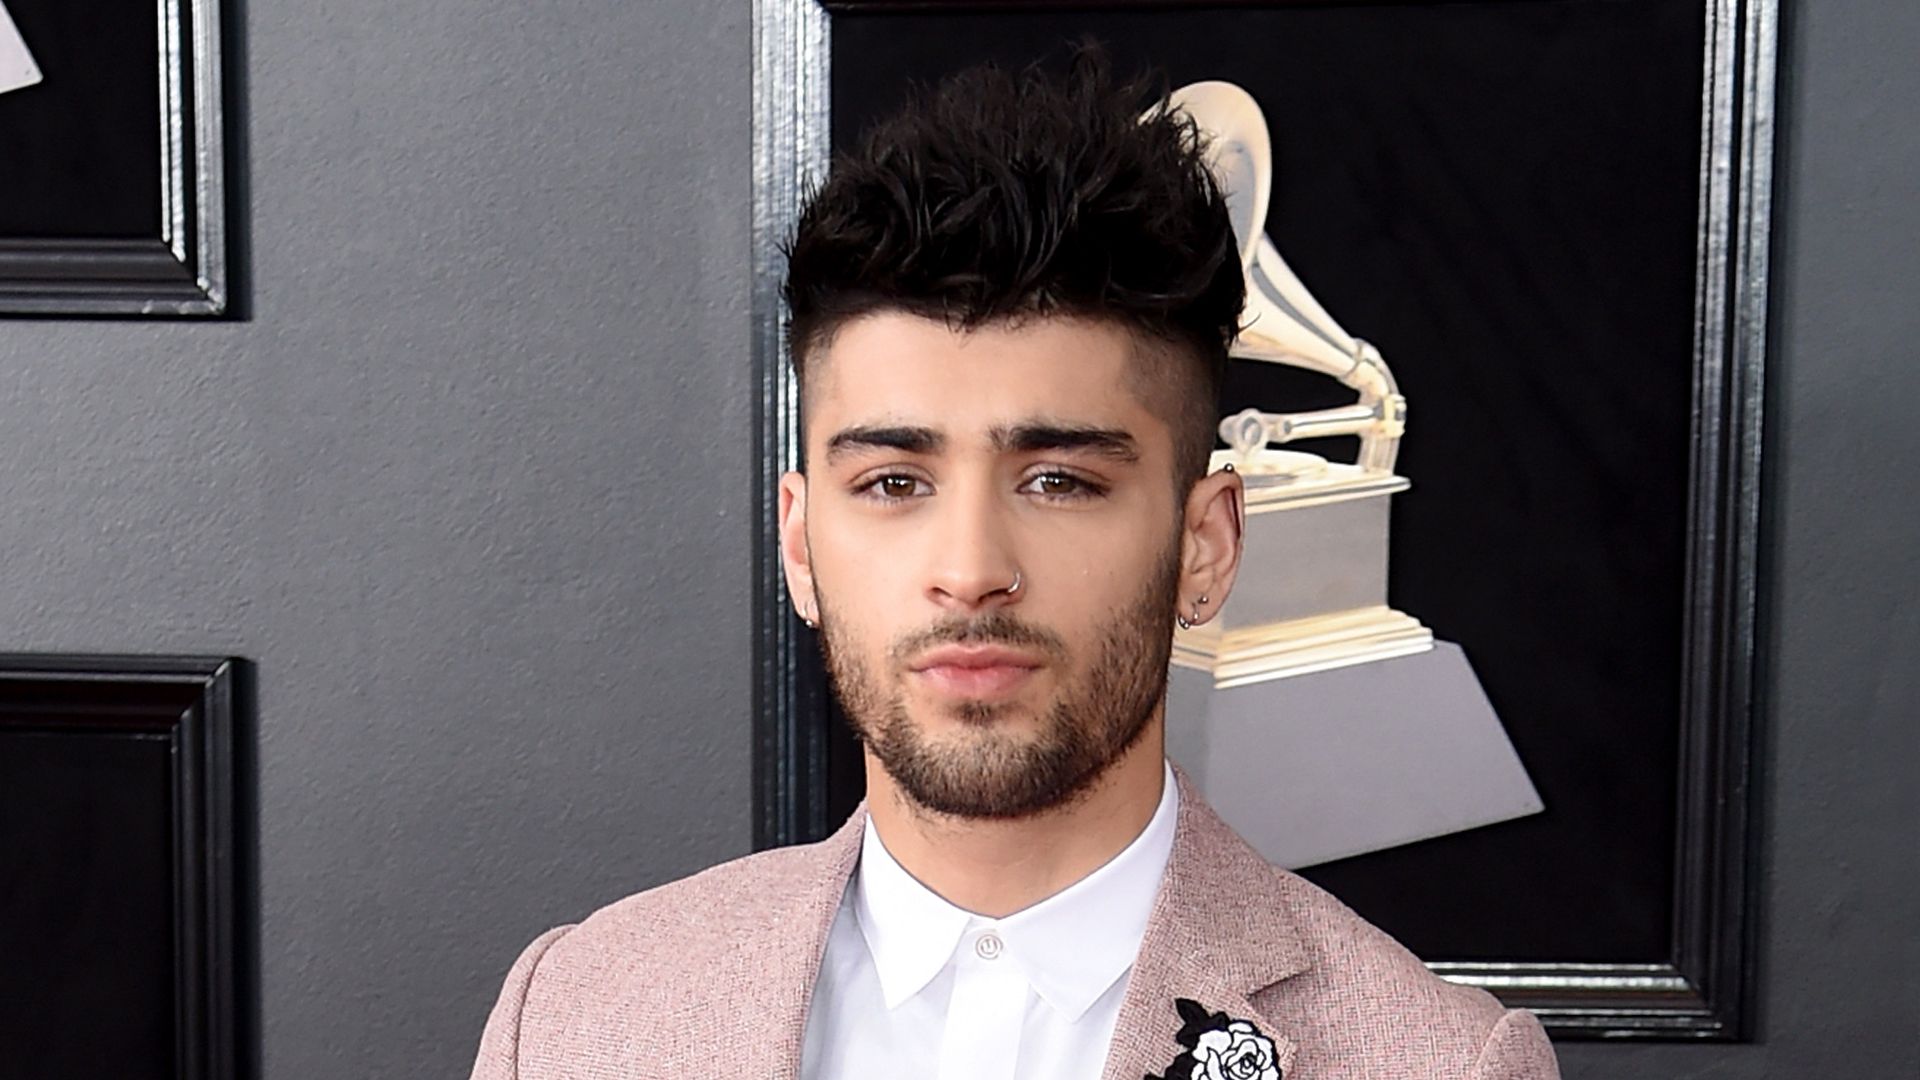 Recording artist Zayn Malik attends the 60th Annual GRAMMY Awards at Madison Square Garden on January 28, 2018 in New York City